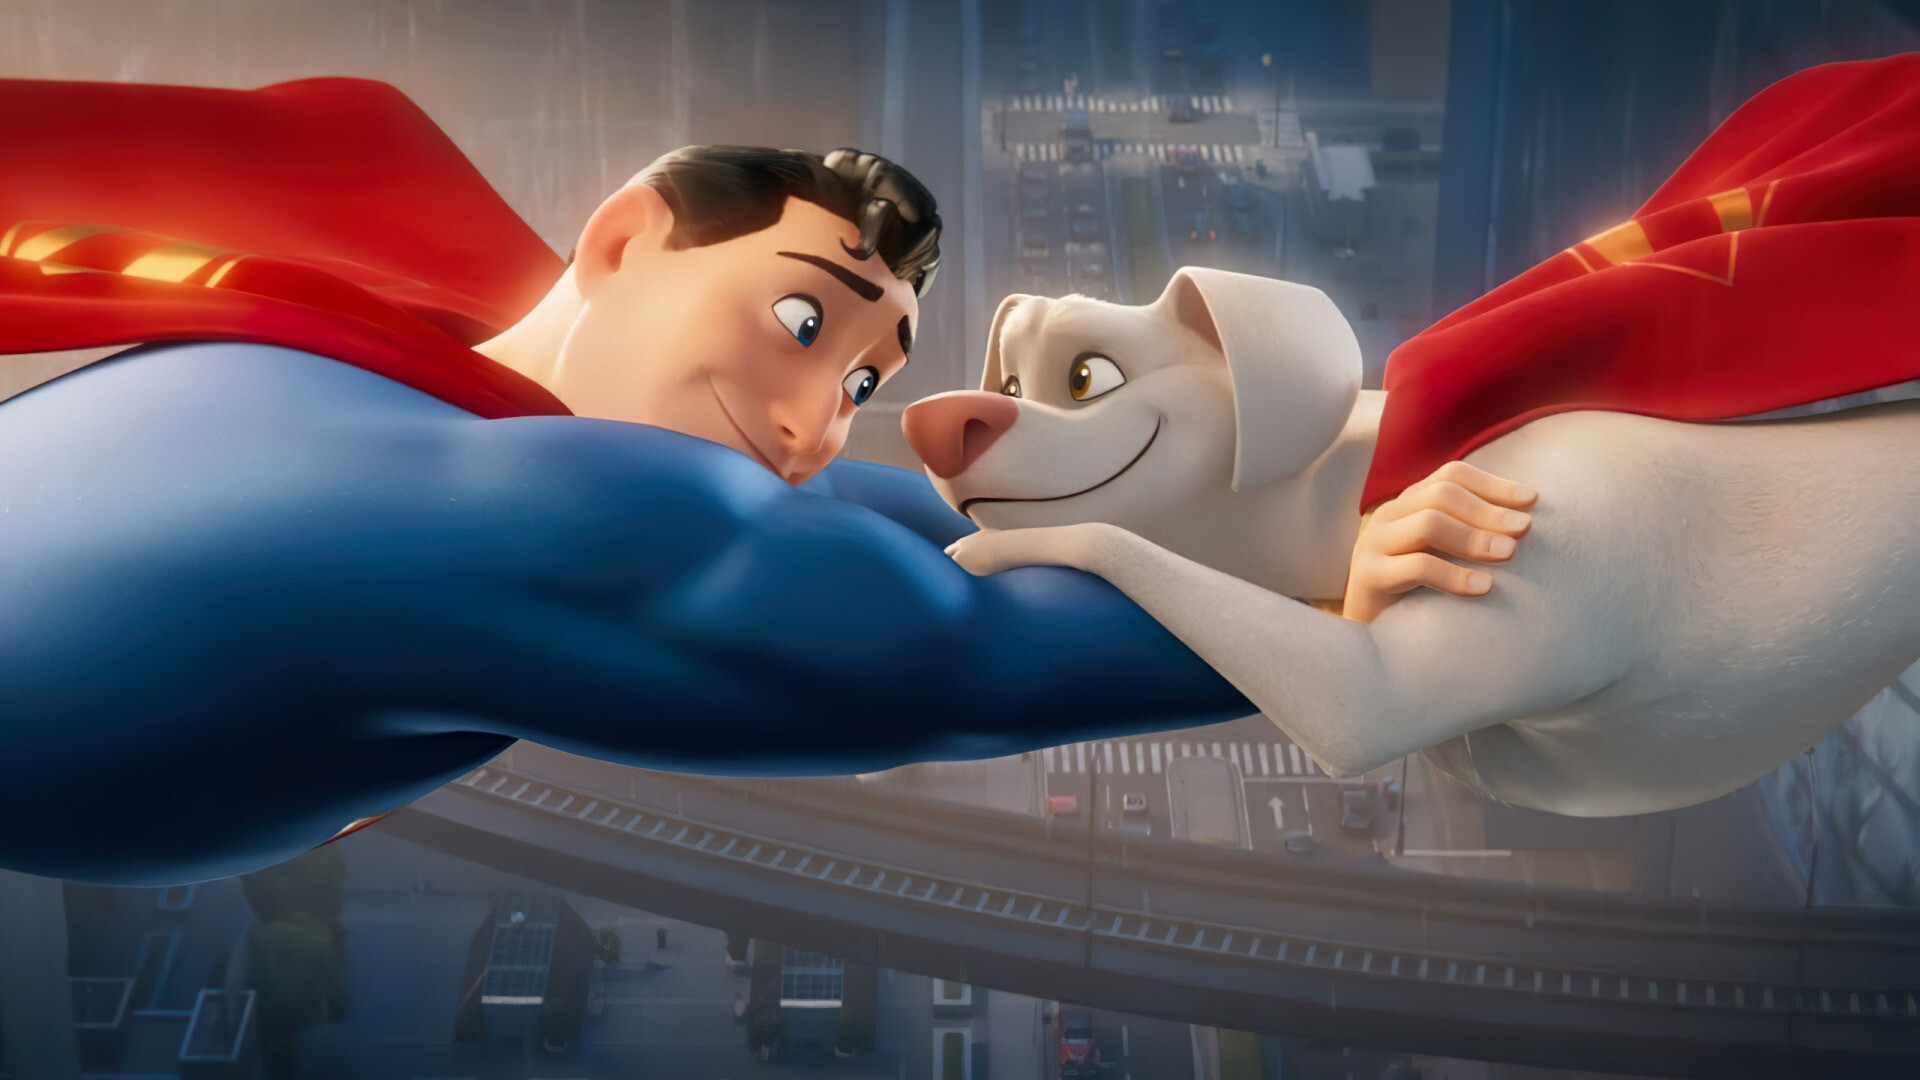 DC League of Super-Pets: A screenplay by Jared Stern and John Whittington, Krypto. 1920x1080 Full HD Background.